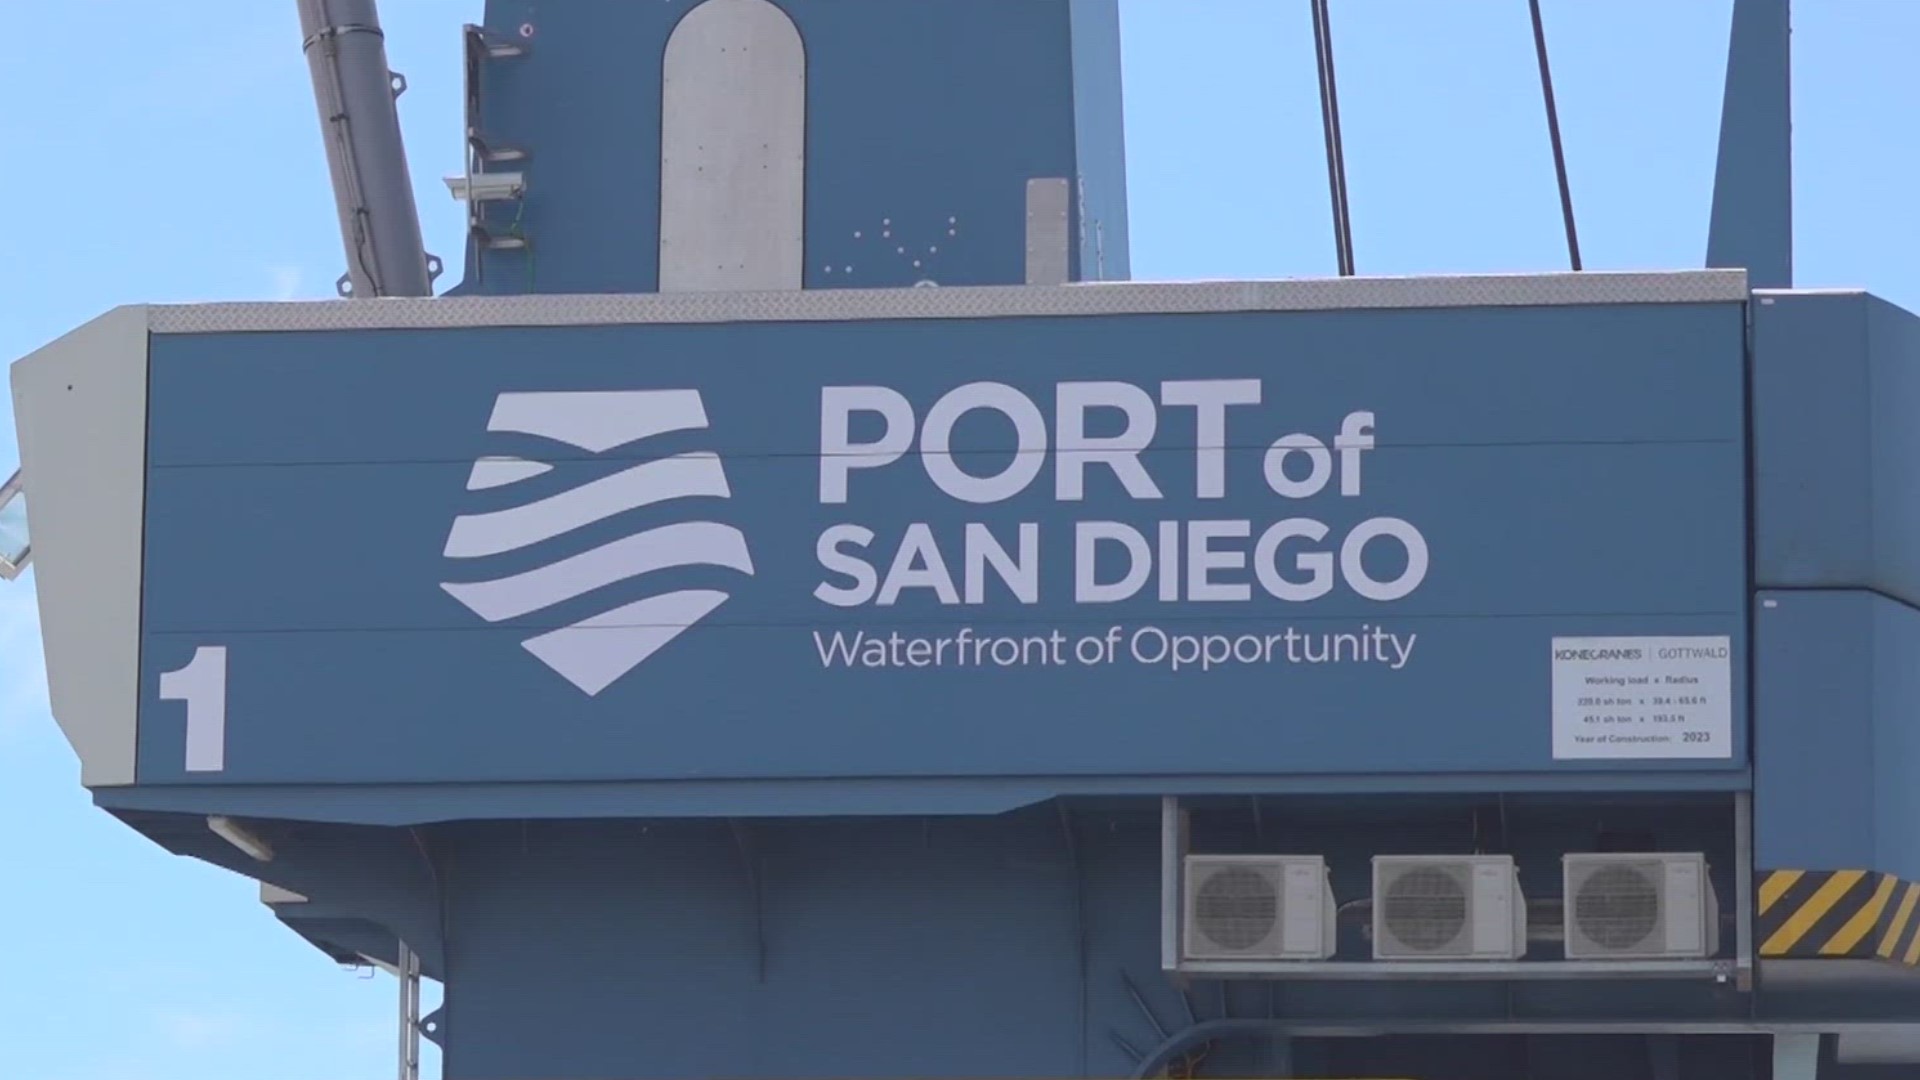 Port alleges that Naranjo retaliated after allegations of a potential pay-to-play scheme on Bayfront project. Naranjo says it is the port that retaliated.